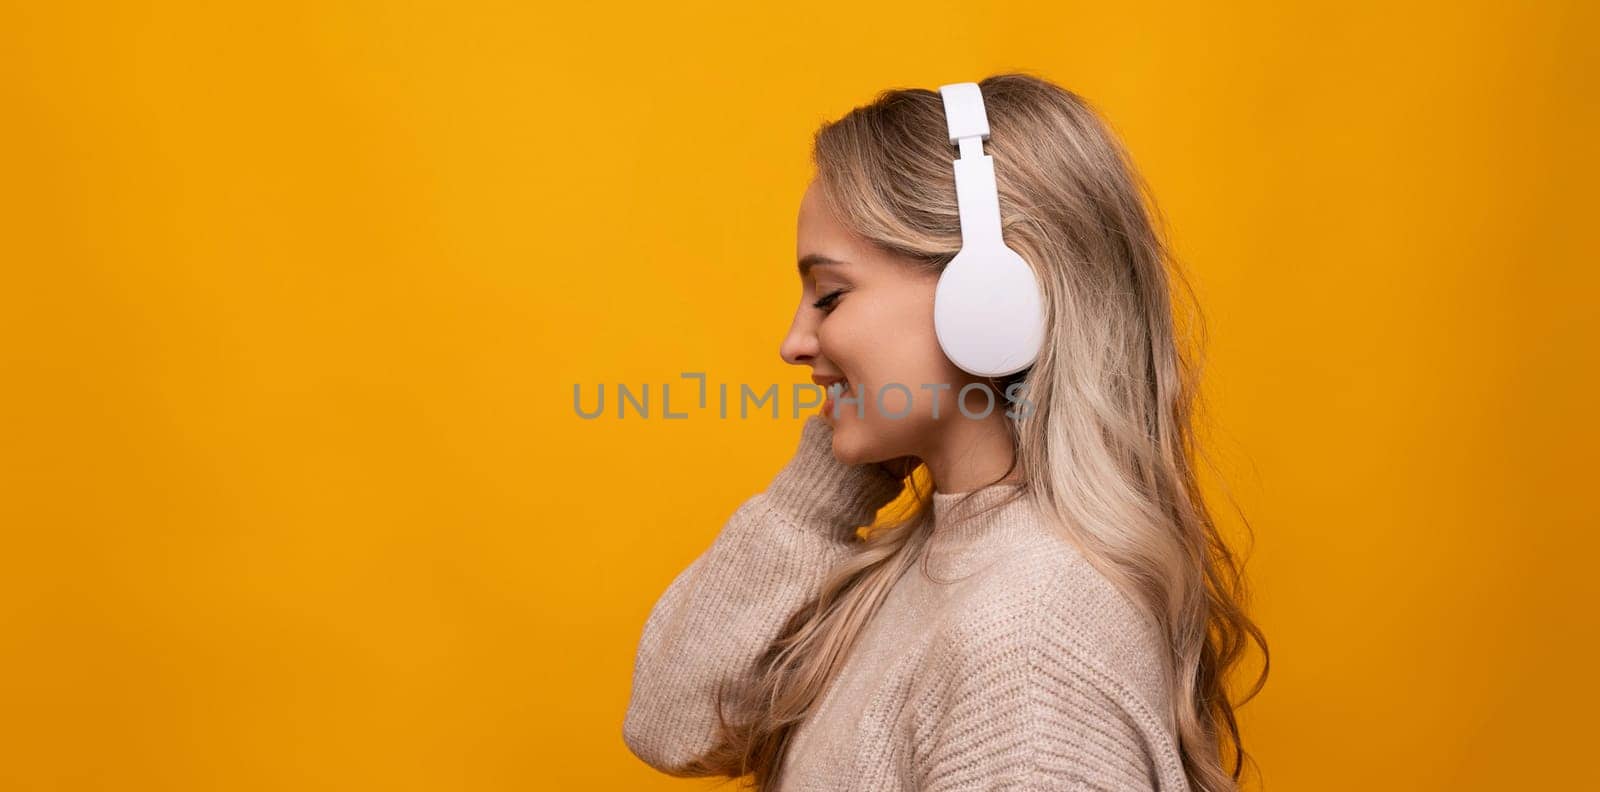 a girl with big headphones listens to her favorite music on a yellow background